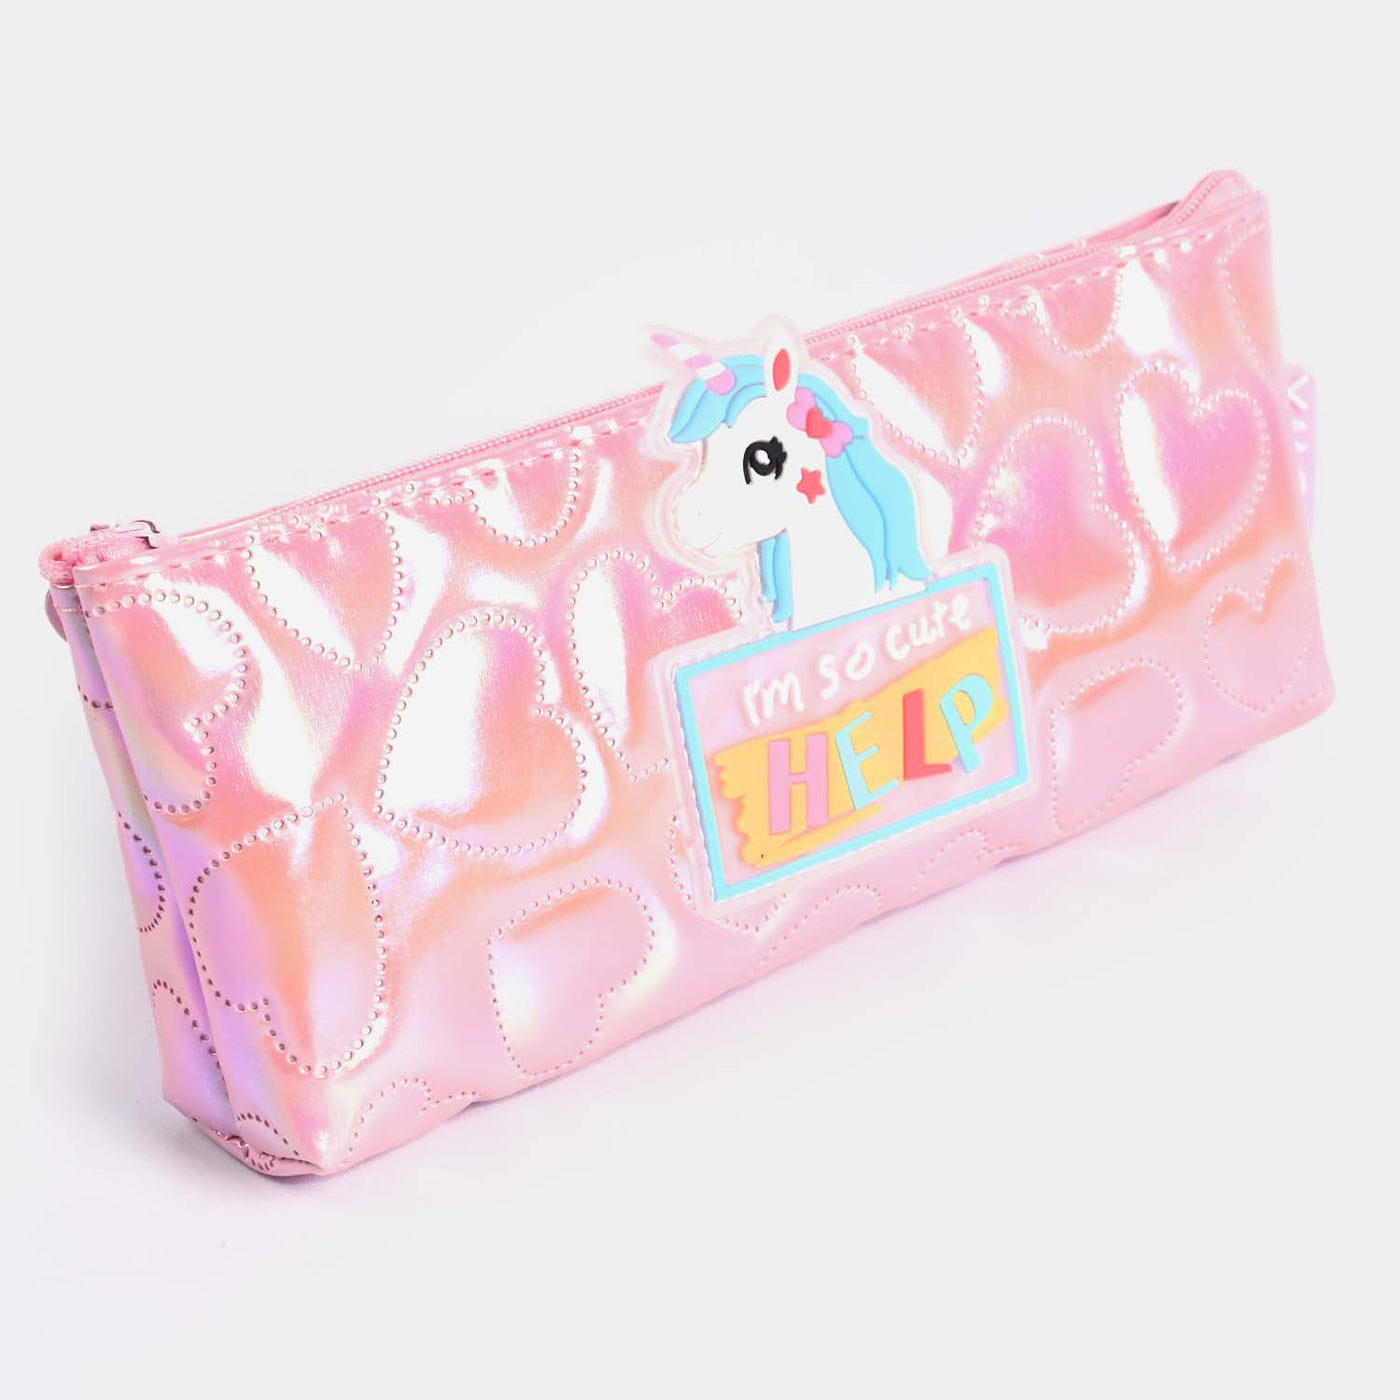 Stationary Pouch For Kids